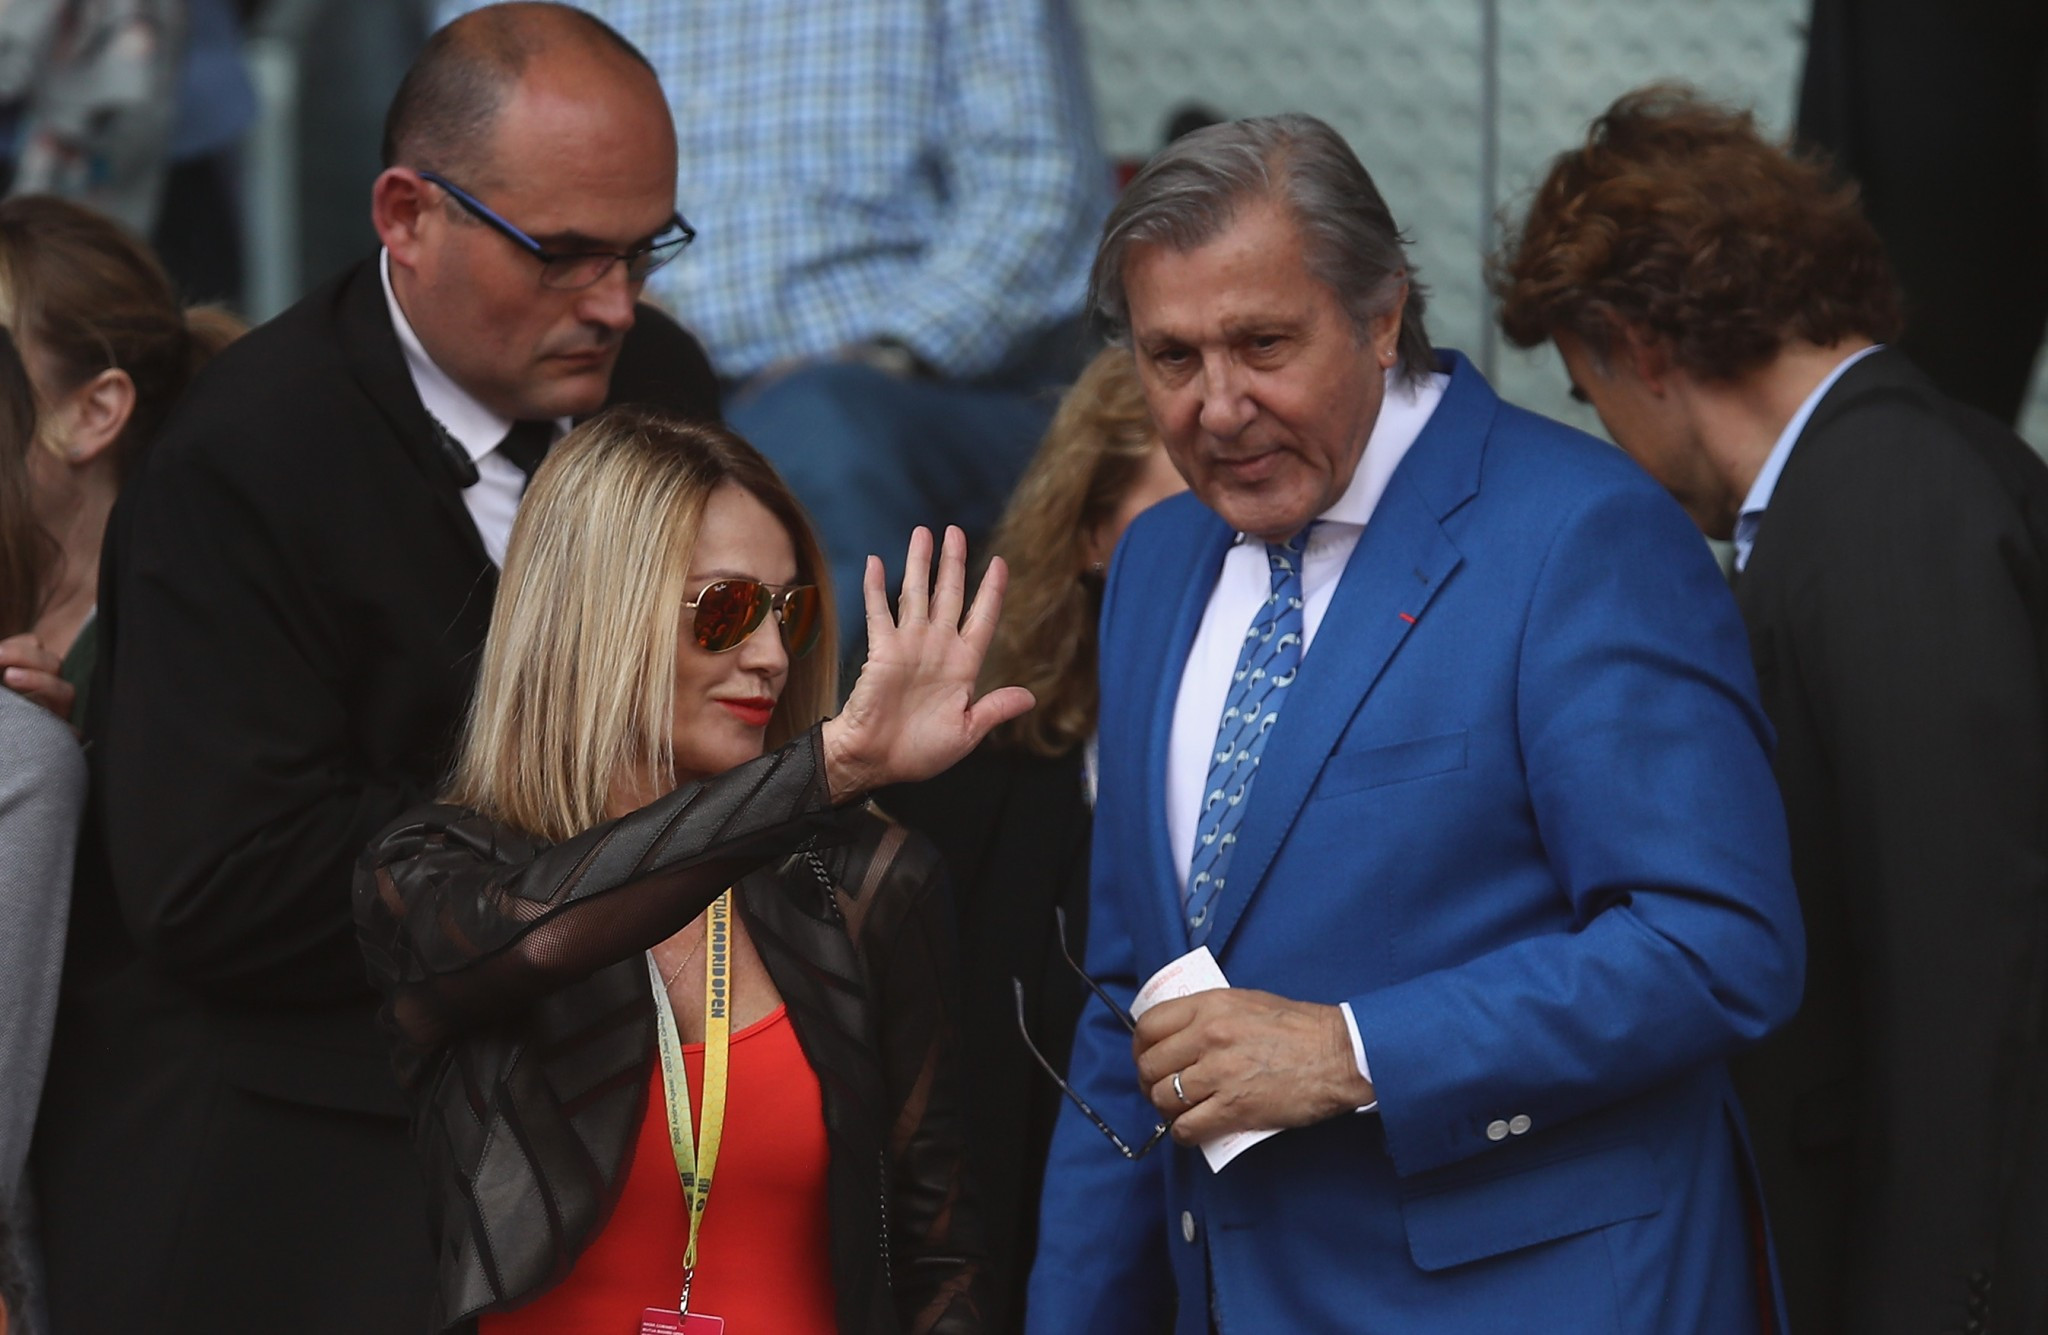 Ilie Nastase, right, has decided to appeal against a ban handed to him following incidents at a Fed Cup tie in April ©Getty Images